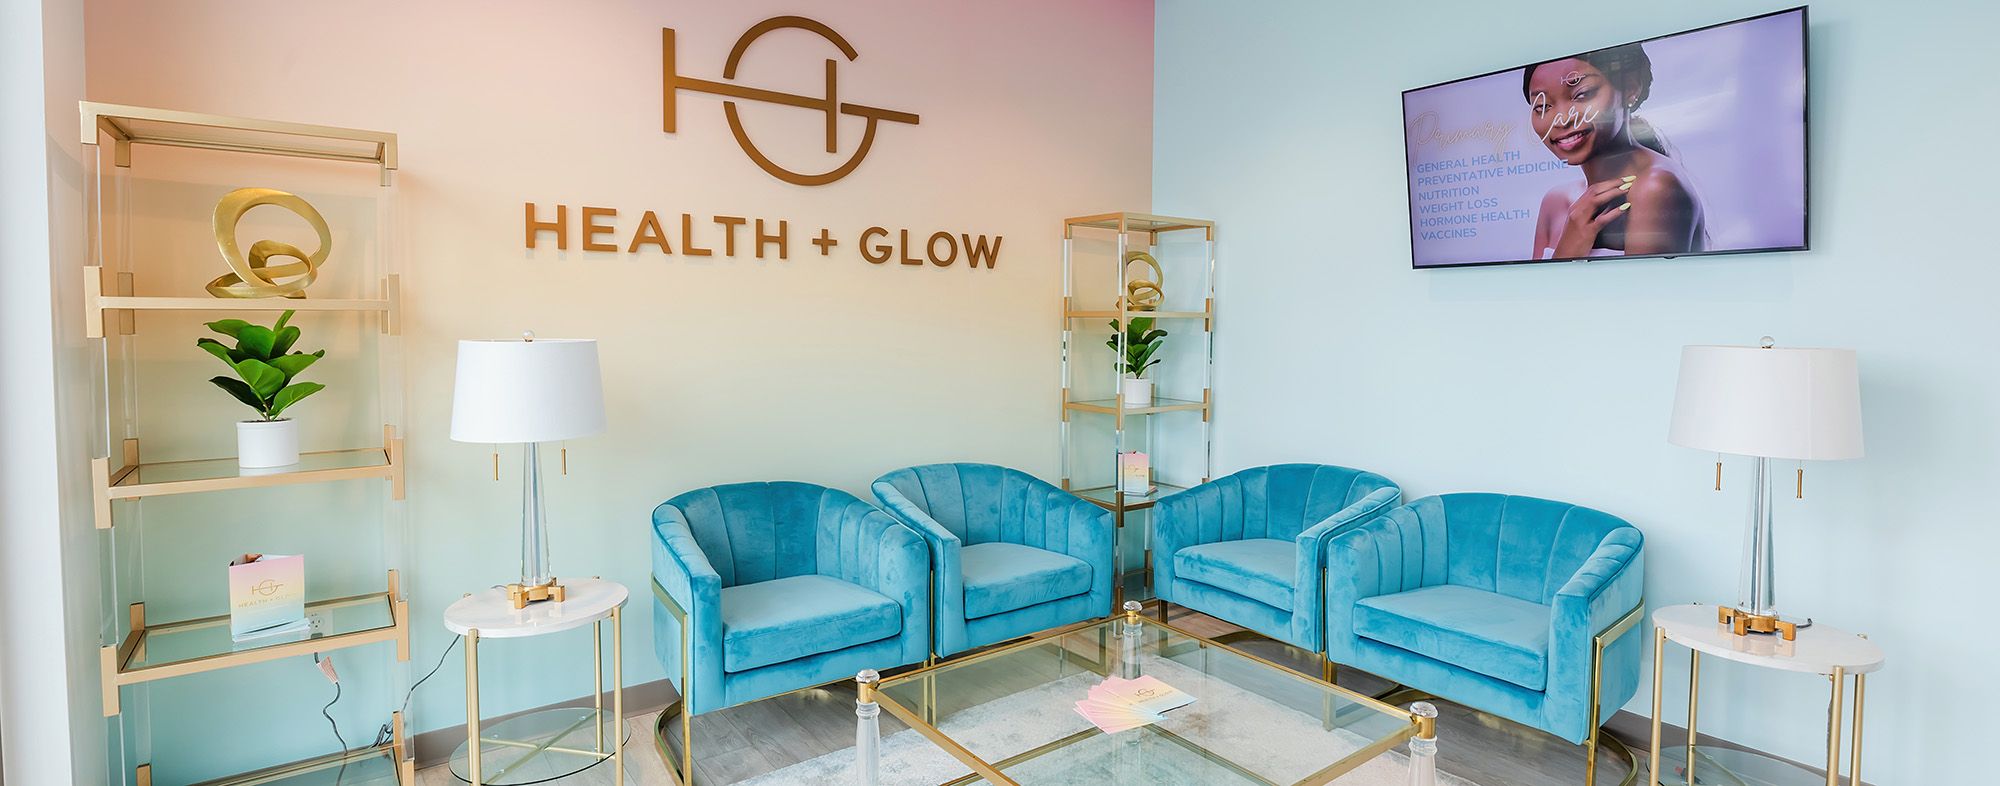 Health and Glow Franchise